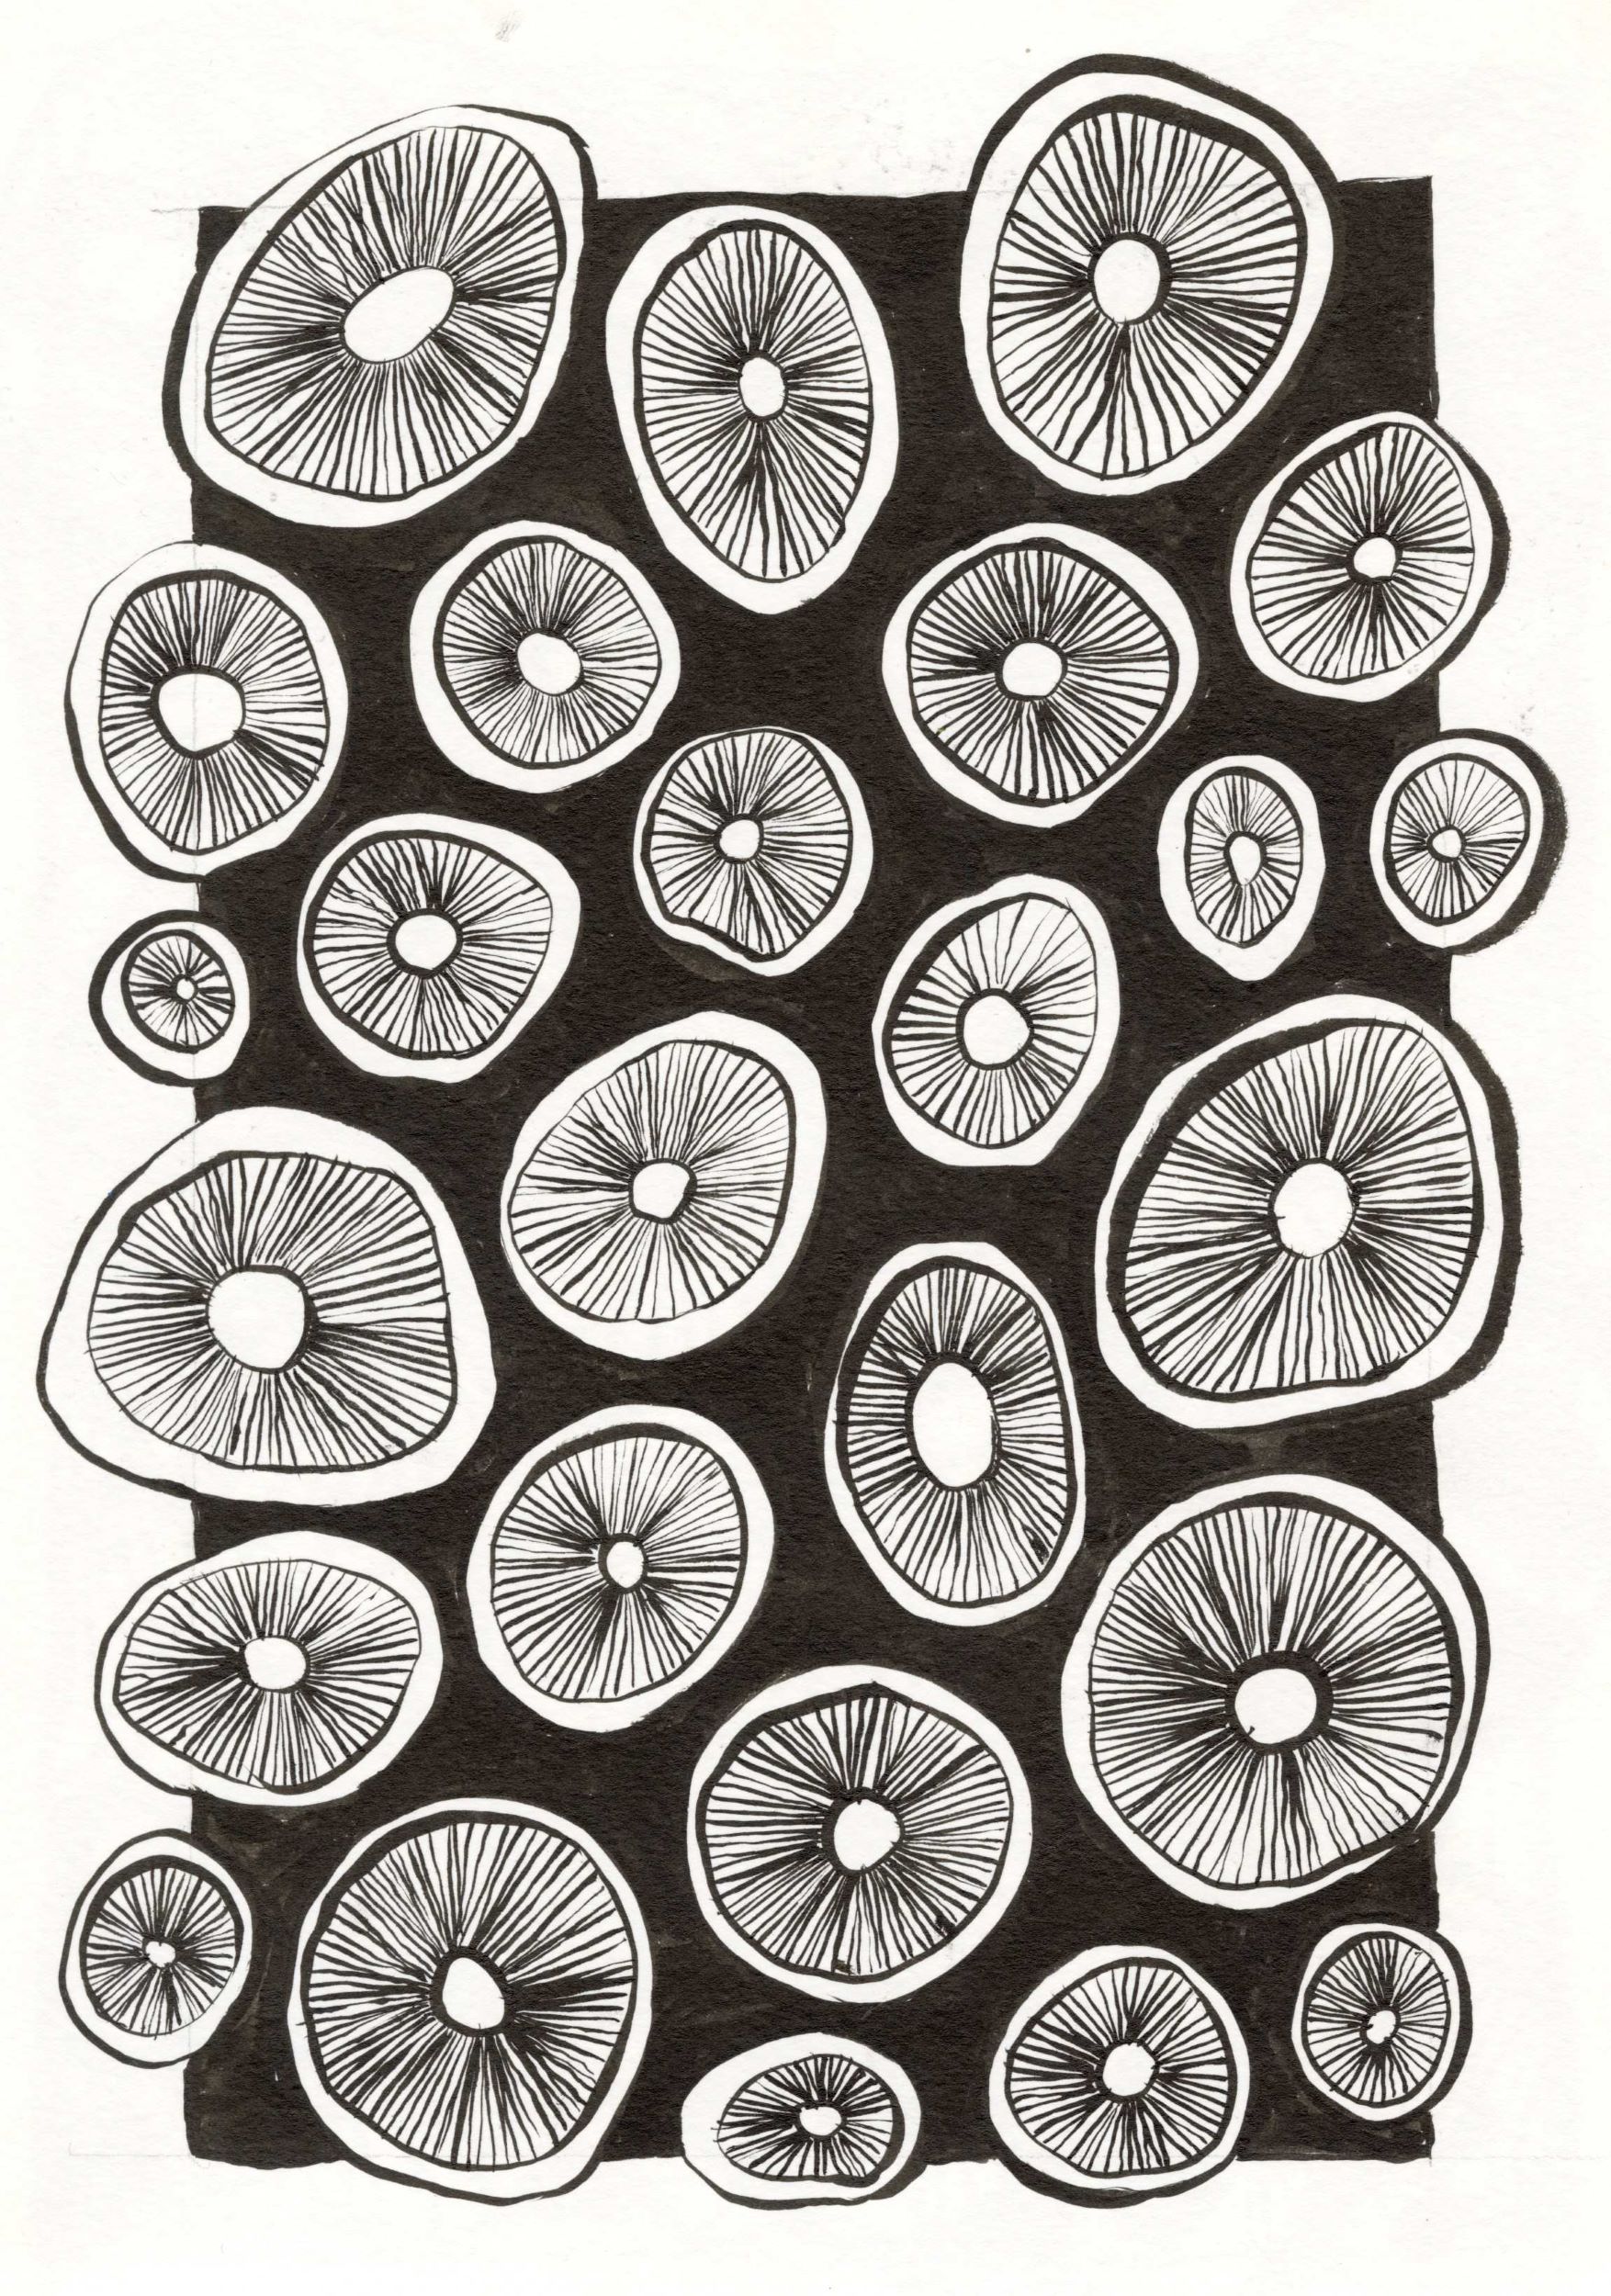 black and white pattern of circular forms with concentric stripes